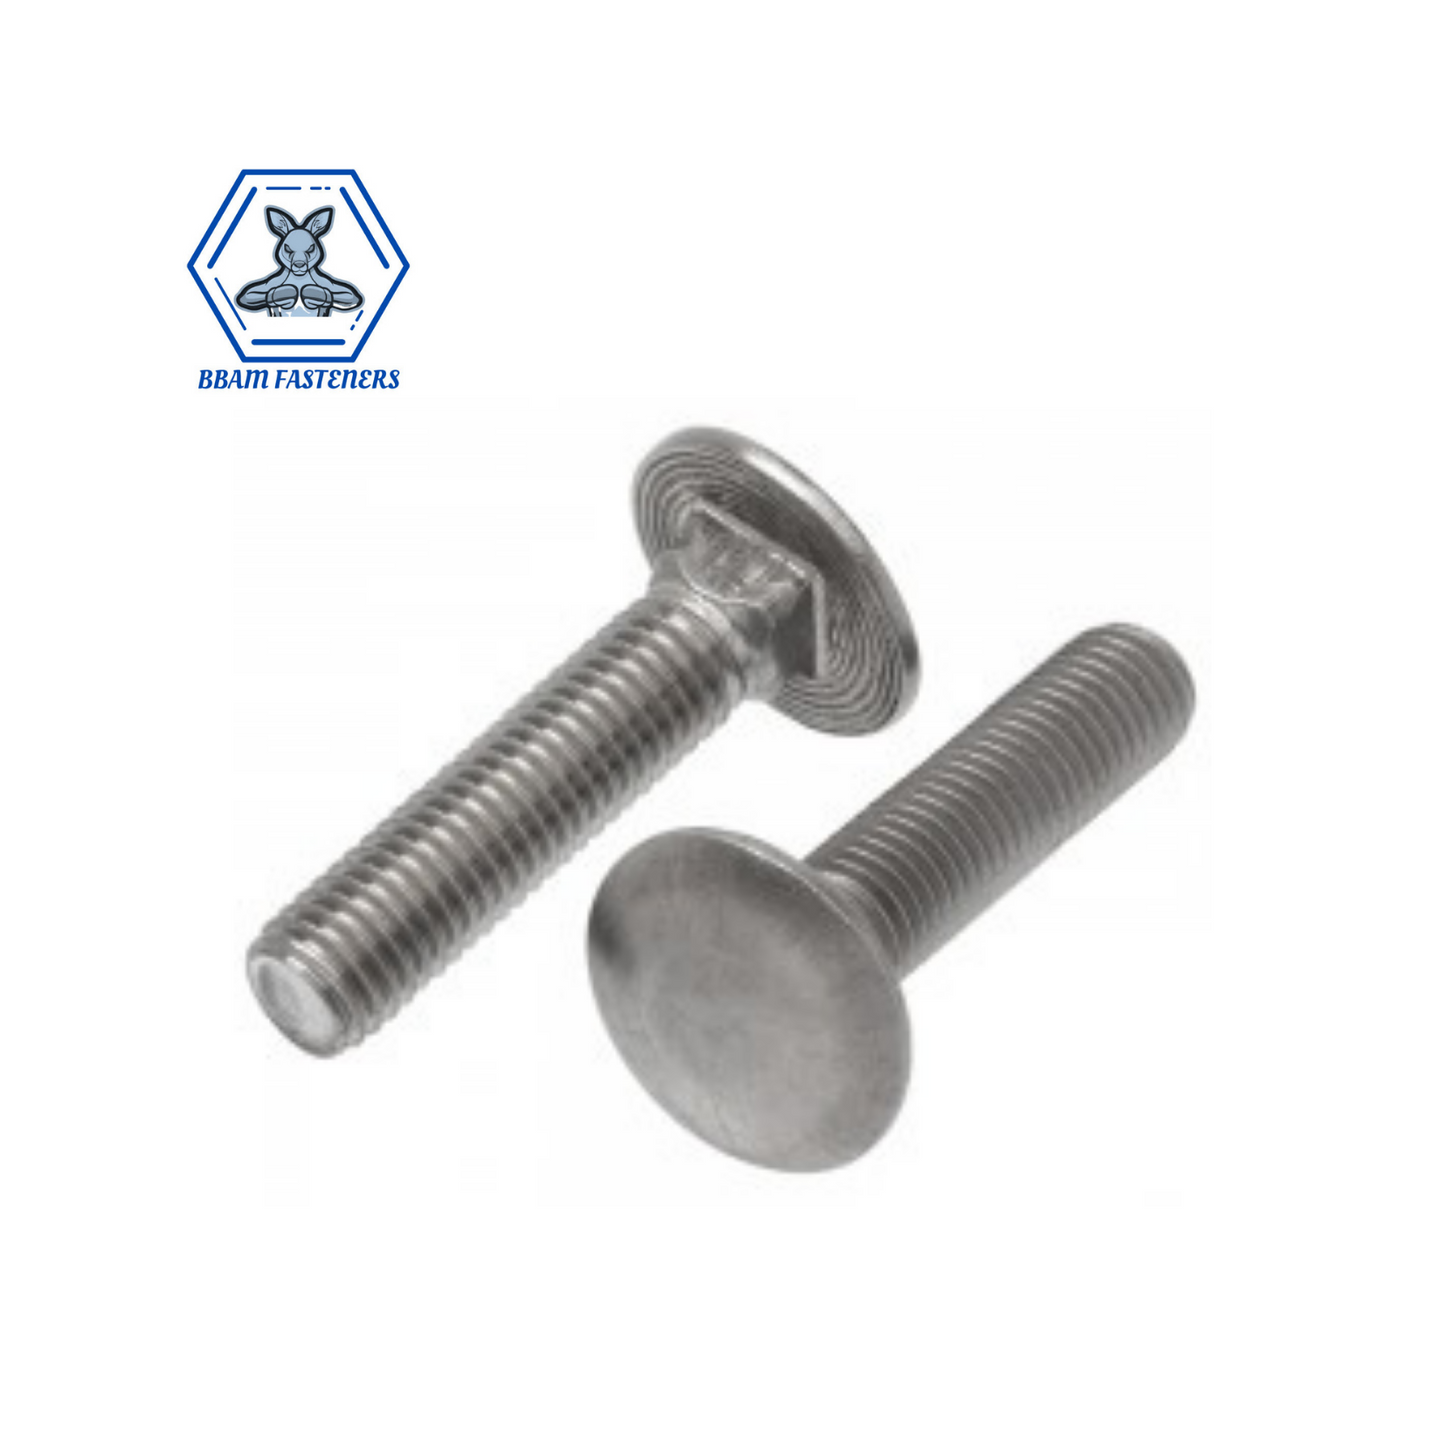 M6 x 60mm Marine Stainless Grade 316 Cup Head Bolt Coach Carriage